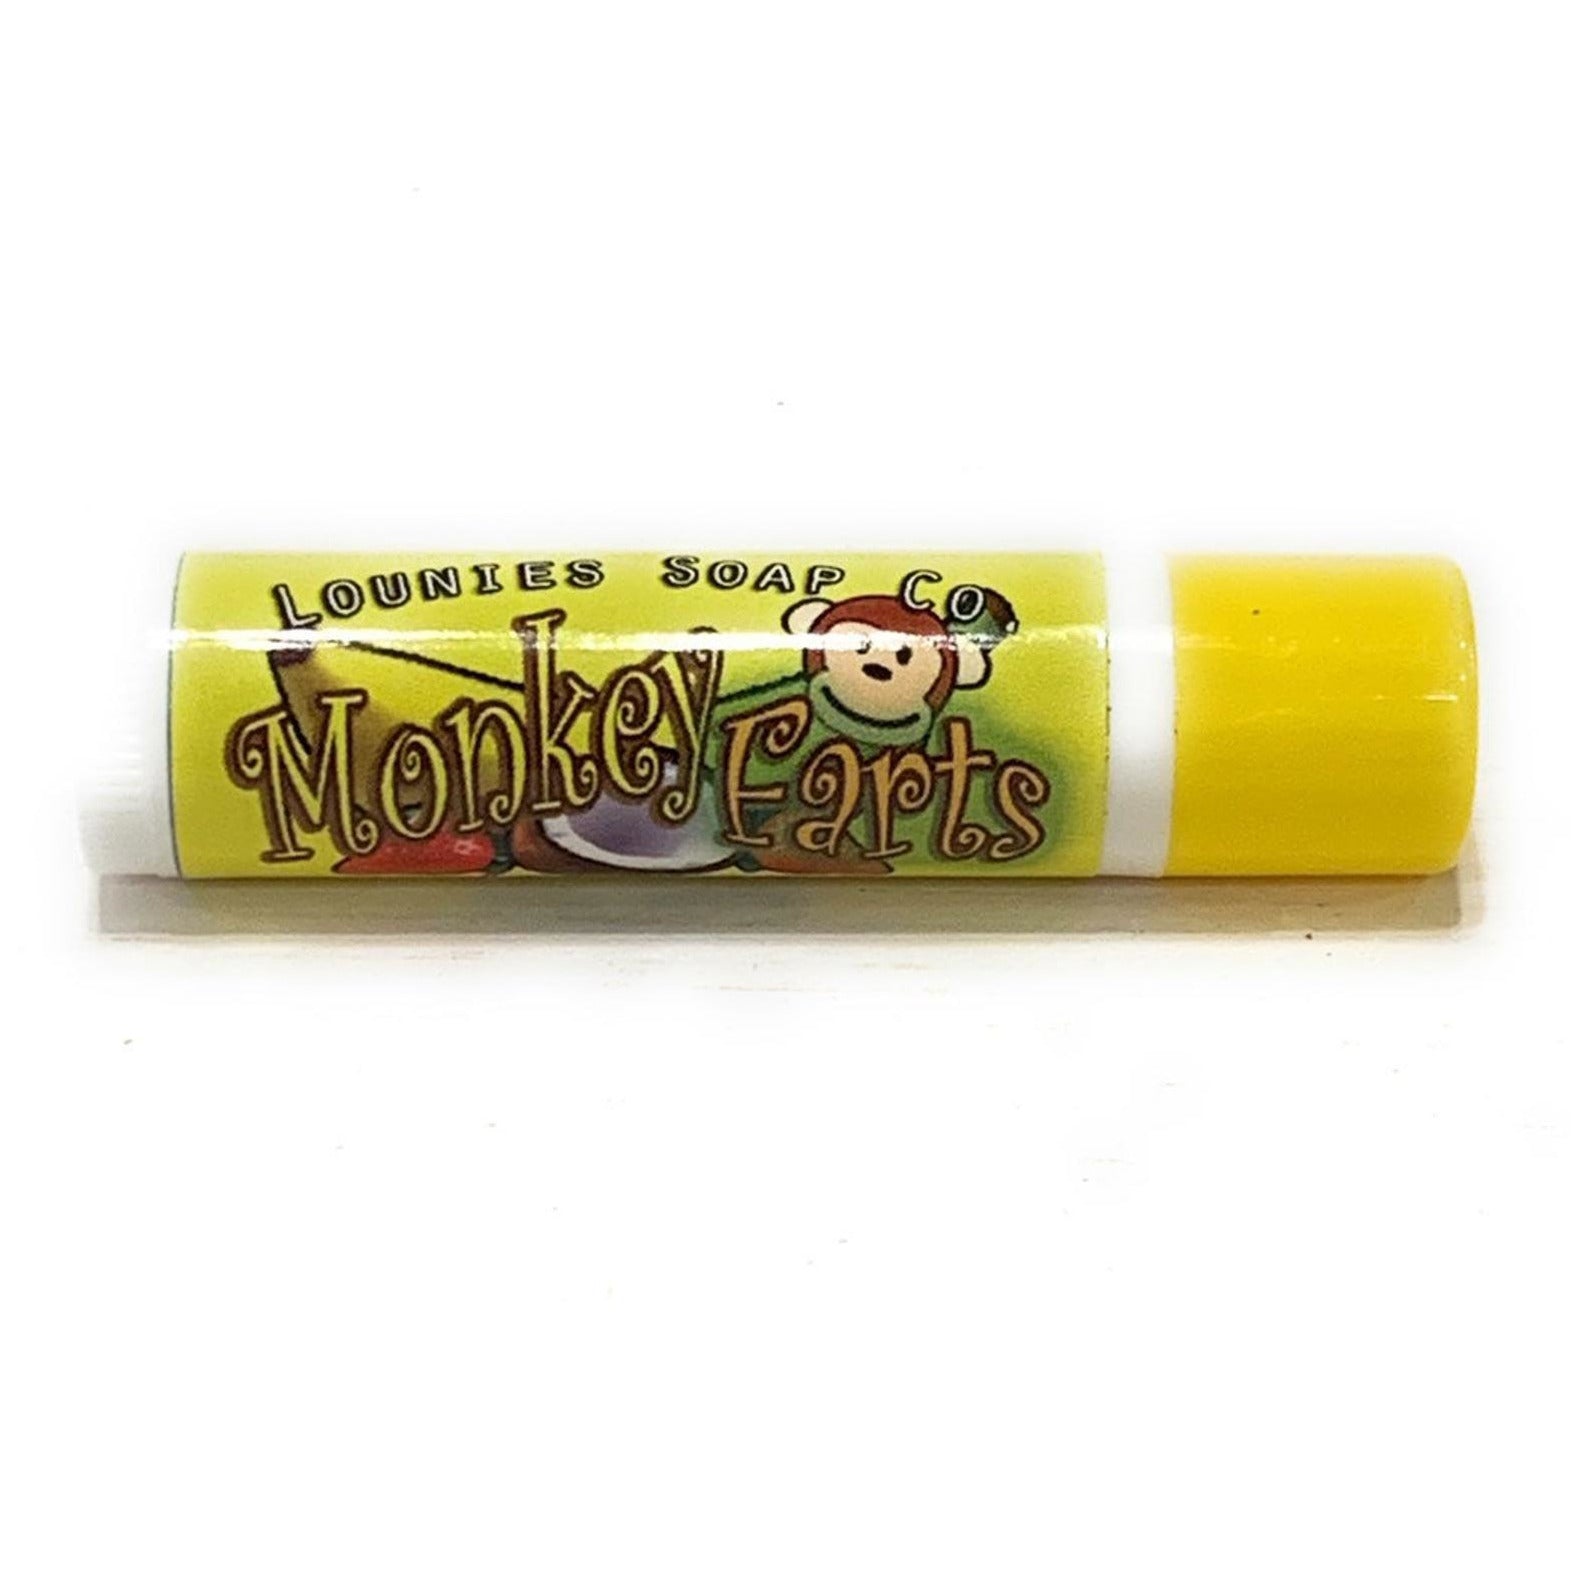 Monkey Farts Exotic Tropical Medly Lip Balm Flavor Oil